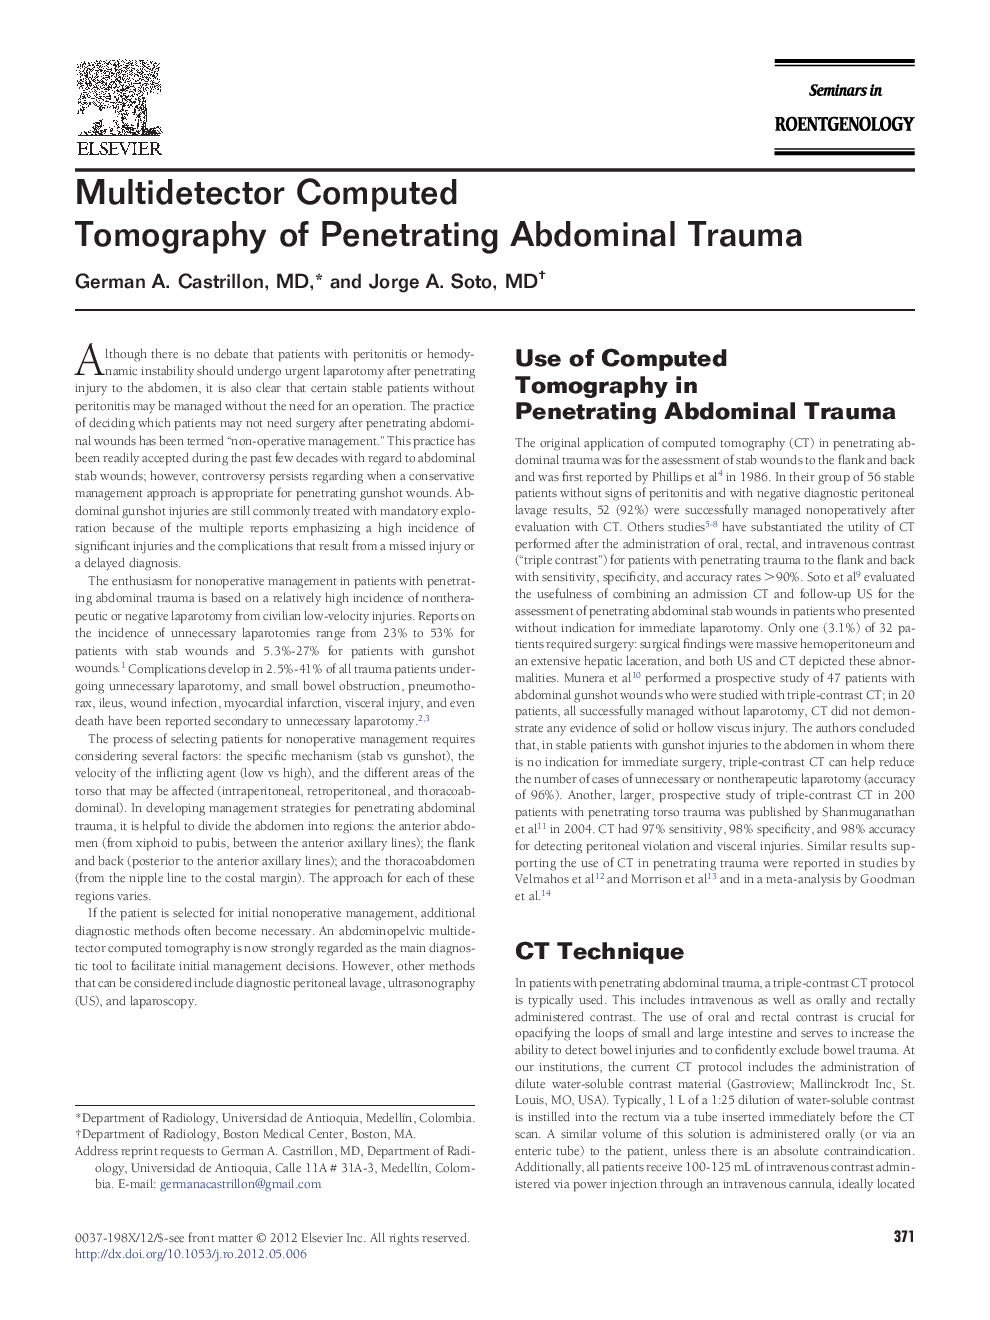 Multidetector Computed Tomography of Penetrating Abdominal Trauma